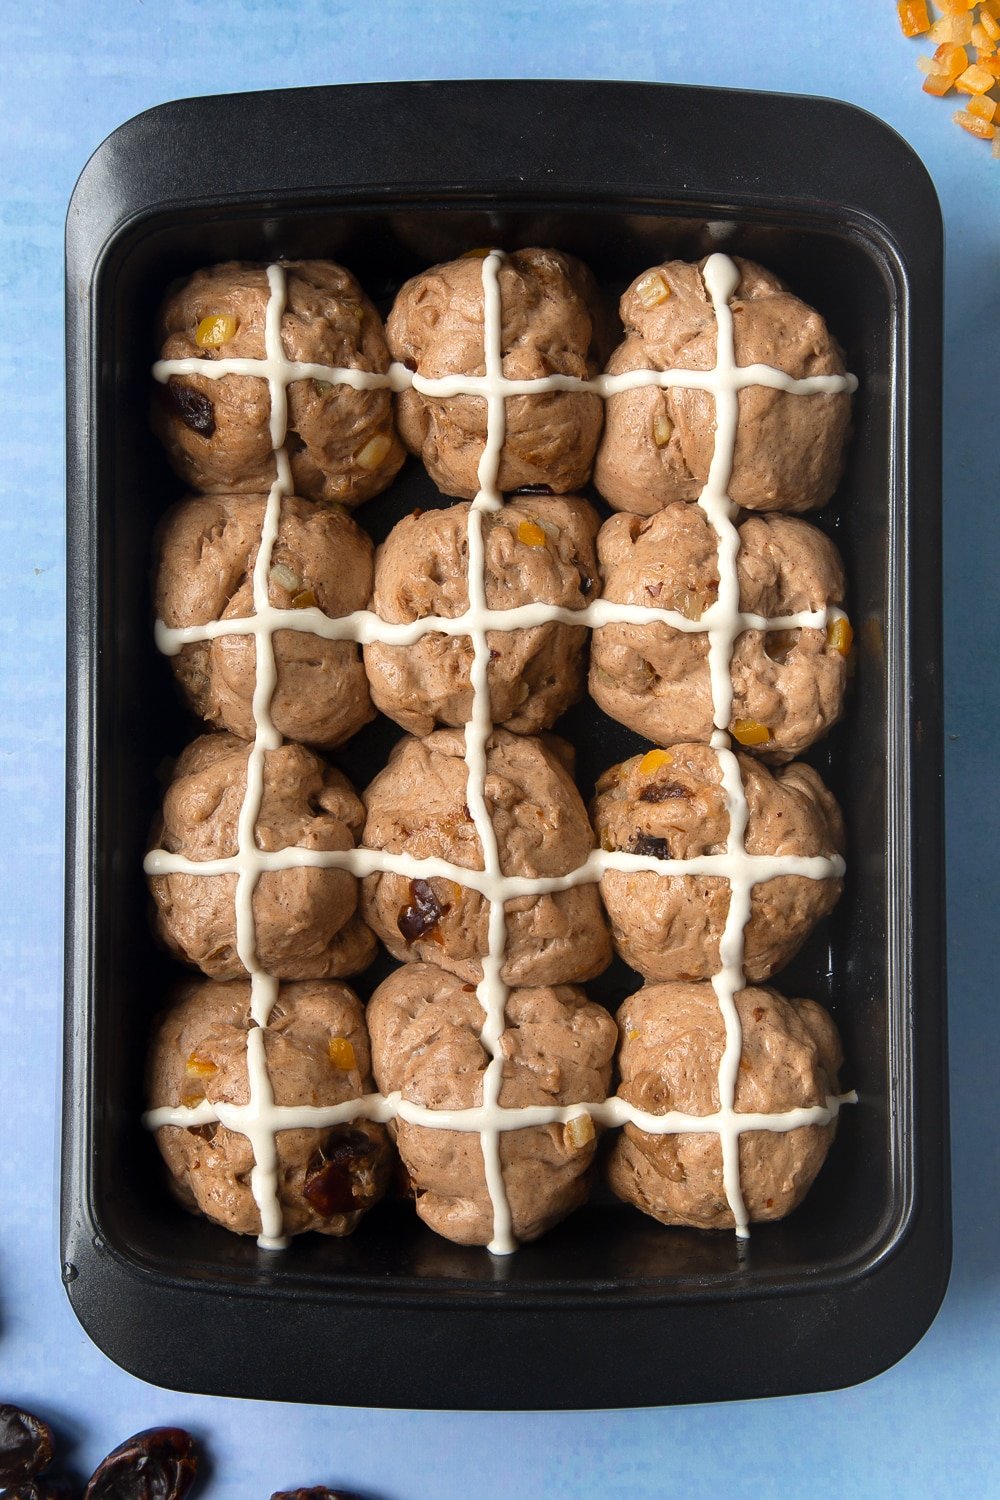 Vegan hot cross buns dough divided into 12 balls and proved in an oiled tray. Thin lines of flour and water paste are piped across the buns 